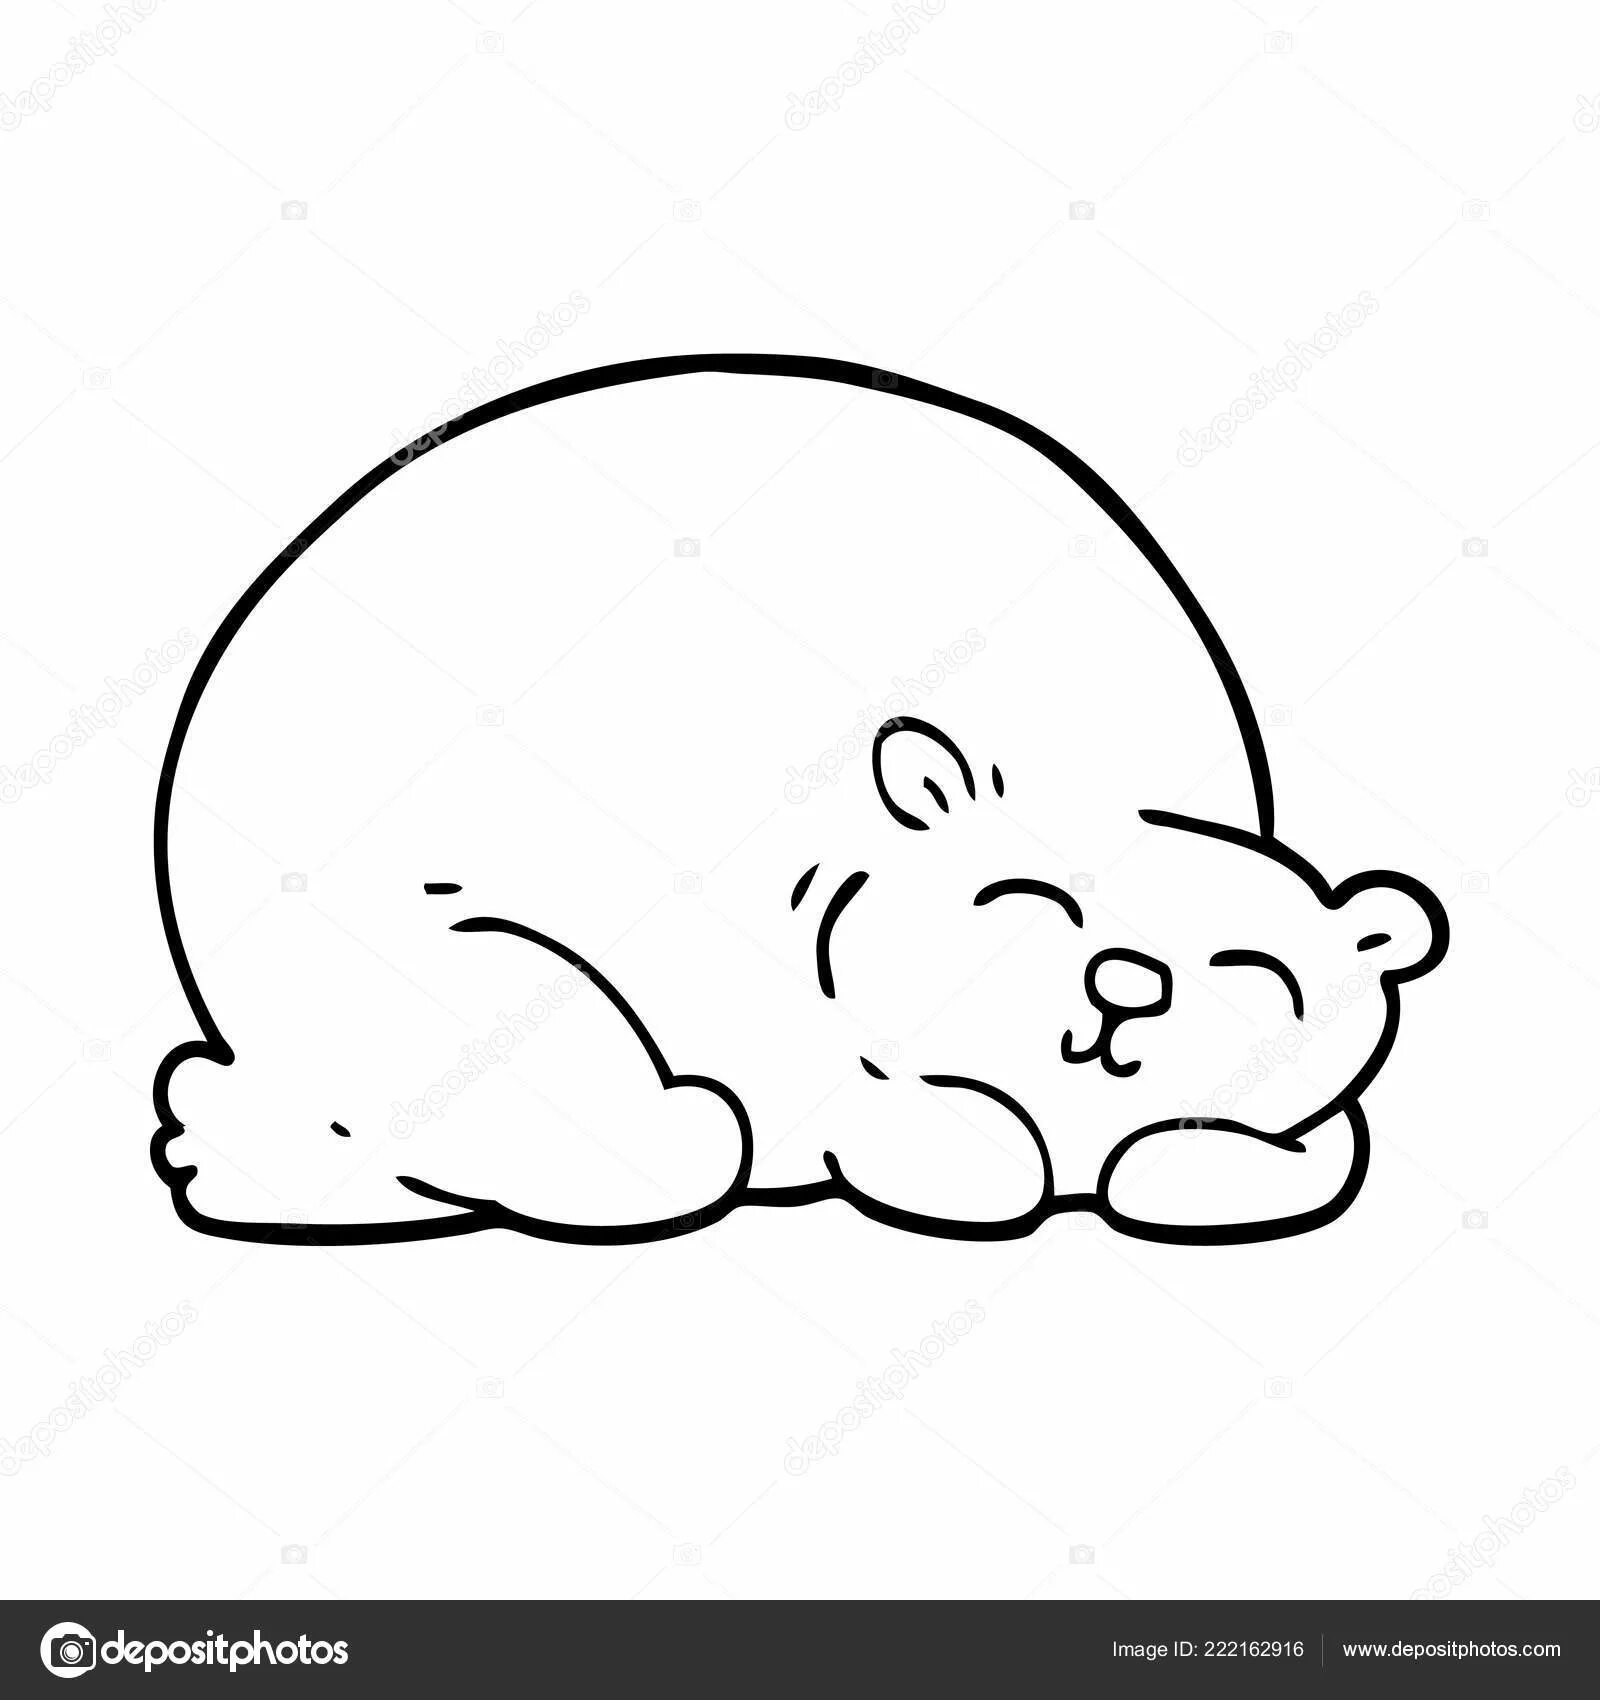 Jubilant coloring page: why do bears sleep in winter?